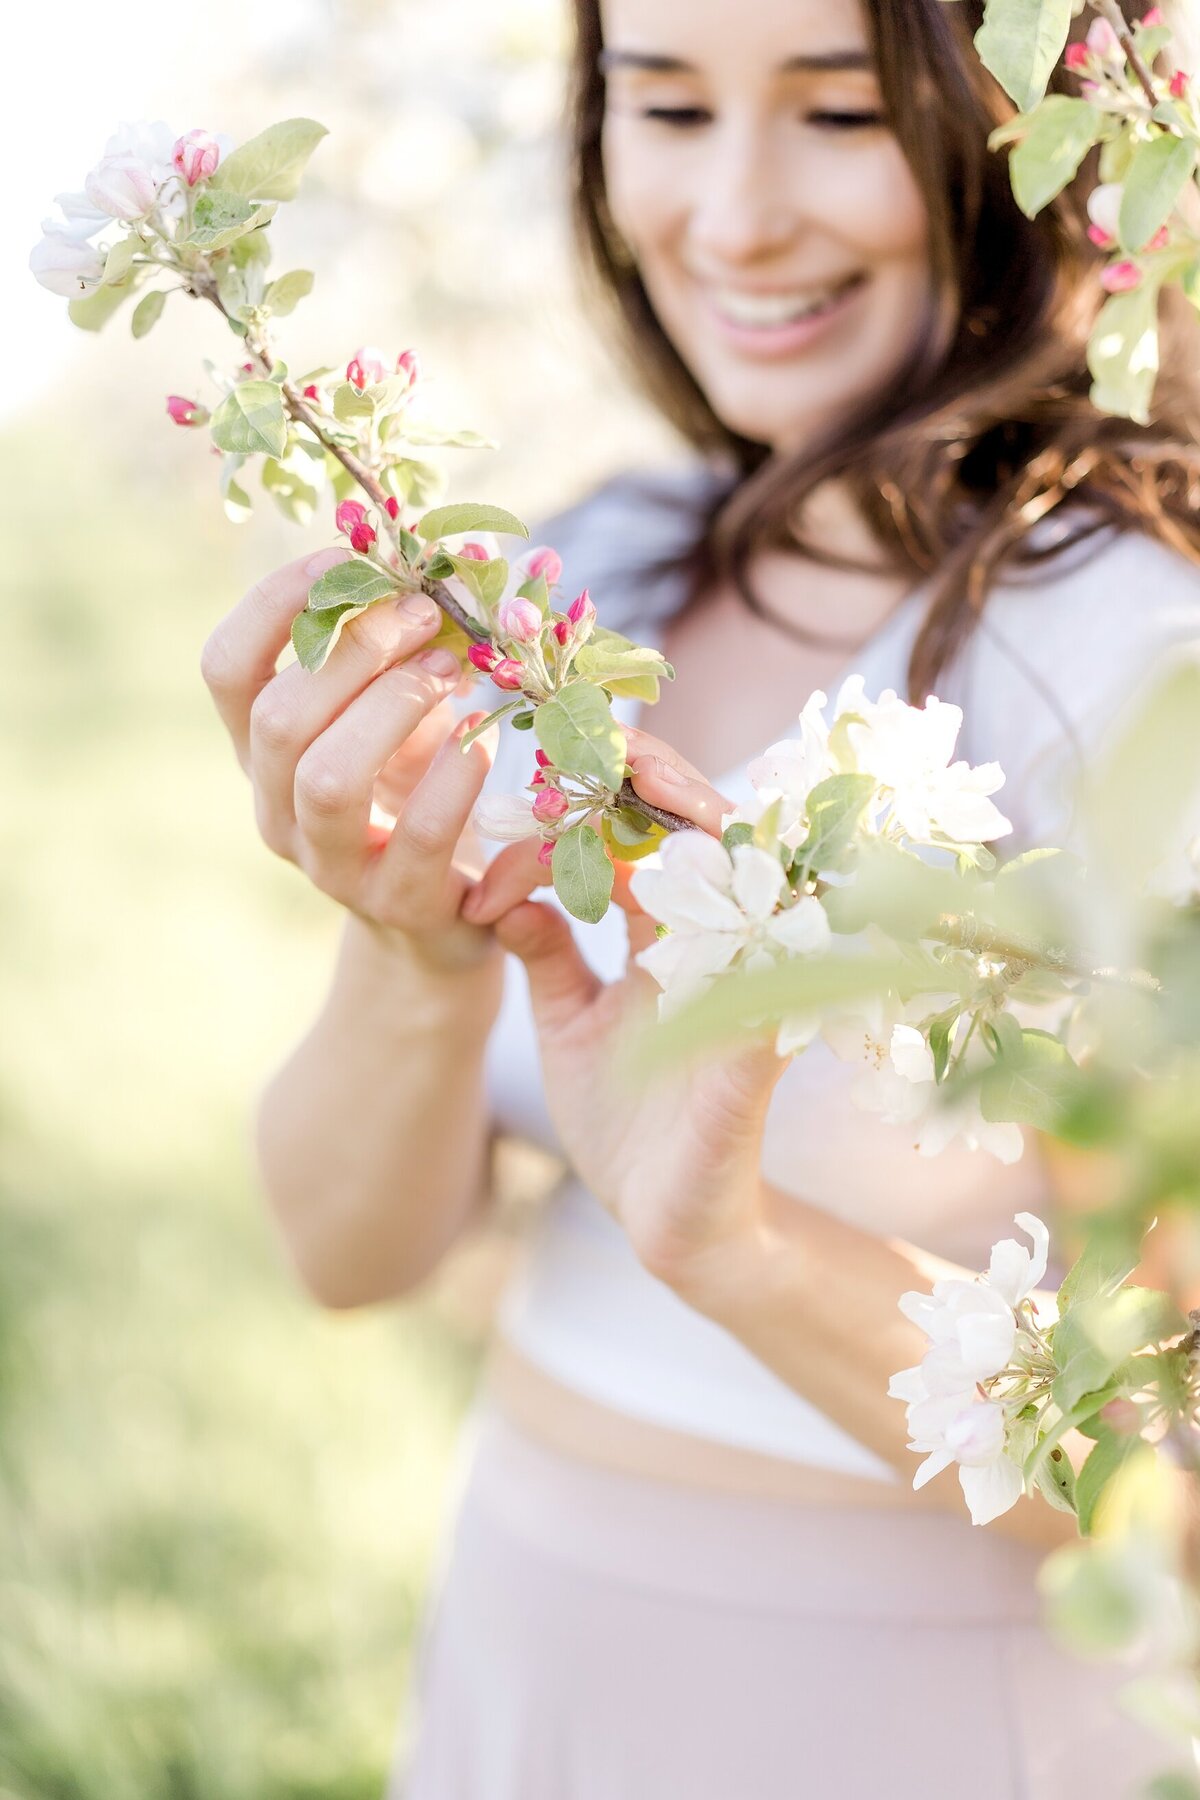 Woman holds branch of blooming flowers.